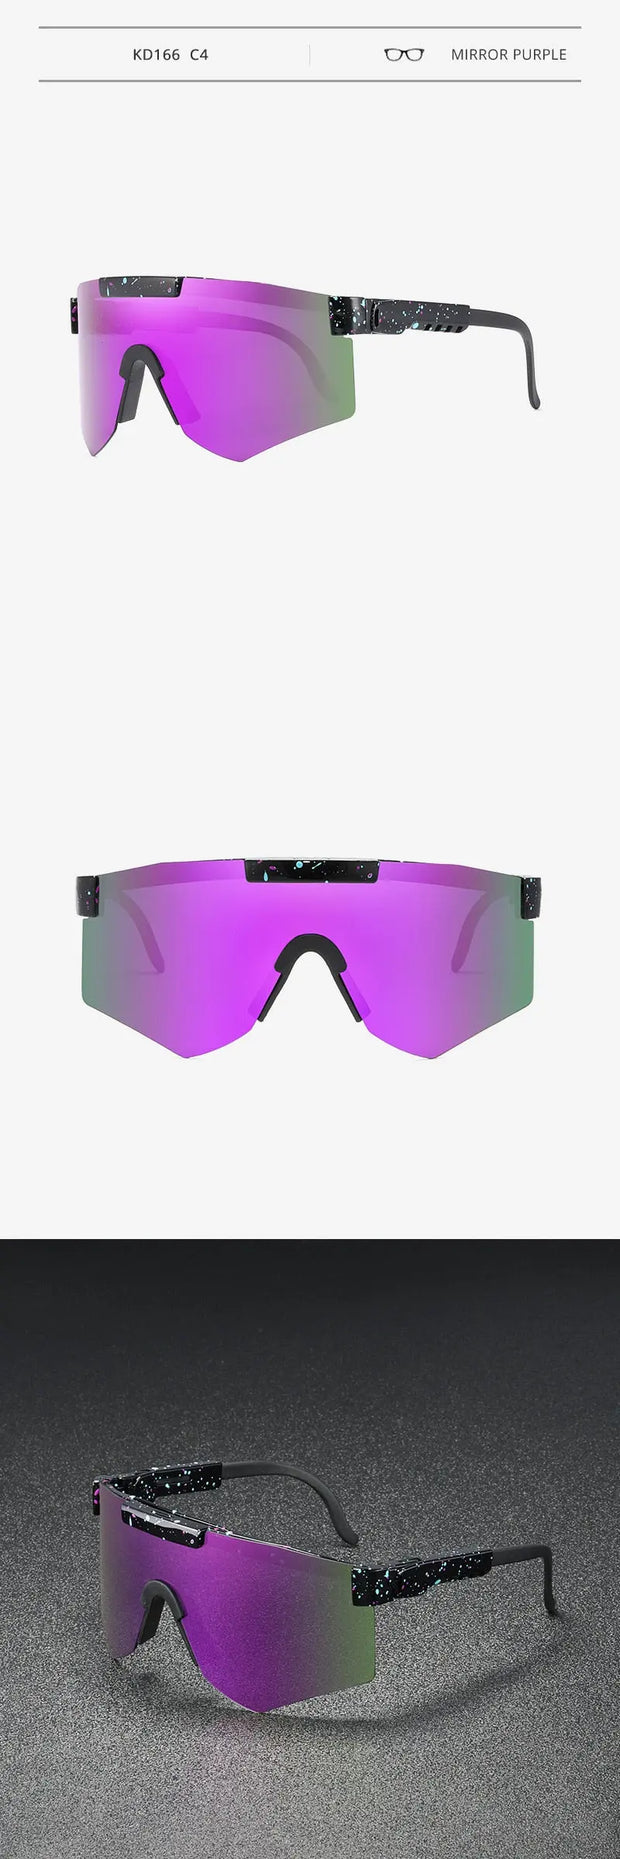 Pink Polarized Sunglasses Cyber Future - Beach Themed Sunglasses Futuristic Visor Sunglasses Oversized Mirror Sunglasses Pink Polarized Sunglasses Wicked Tender